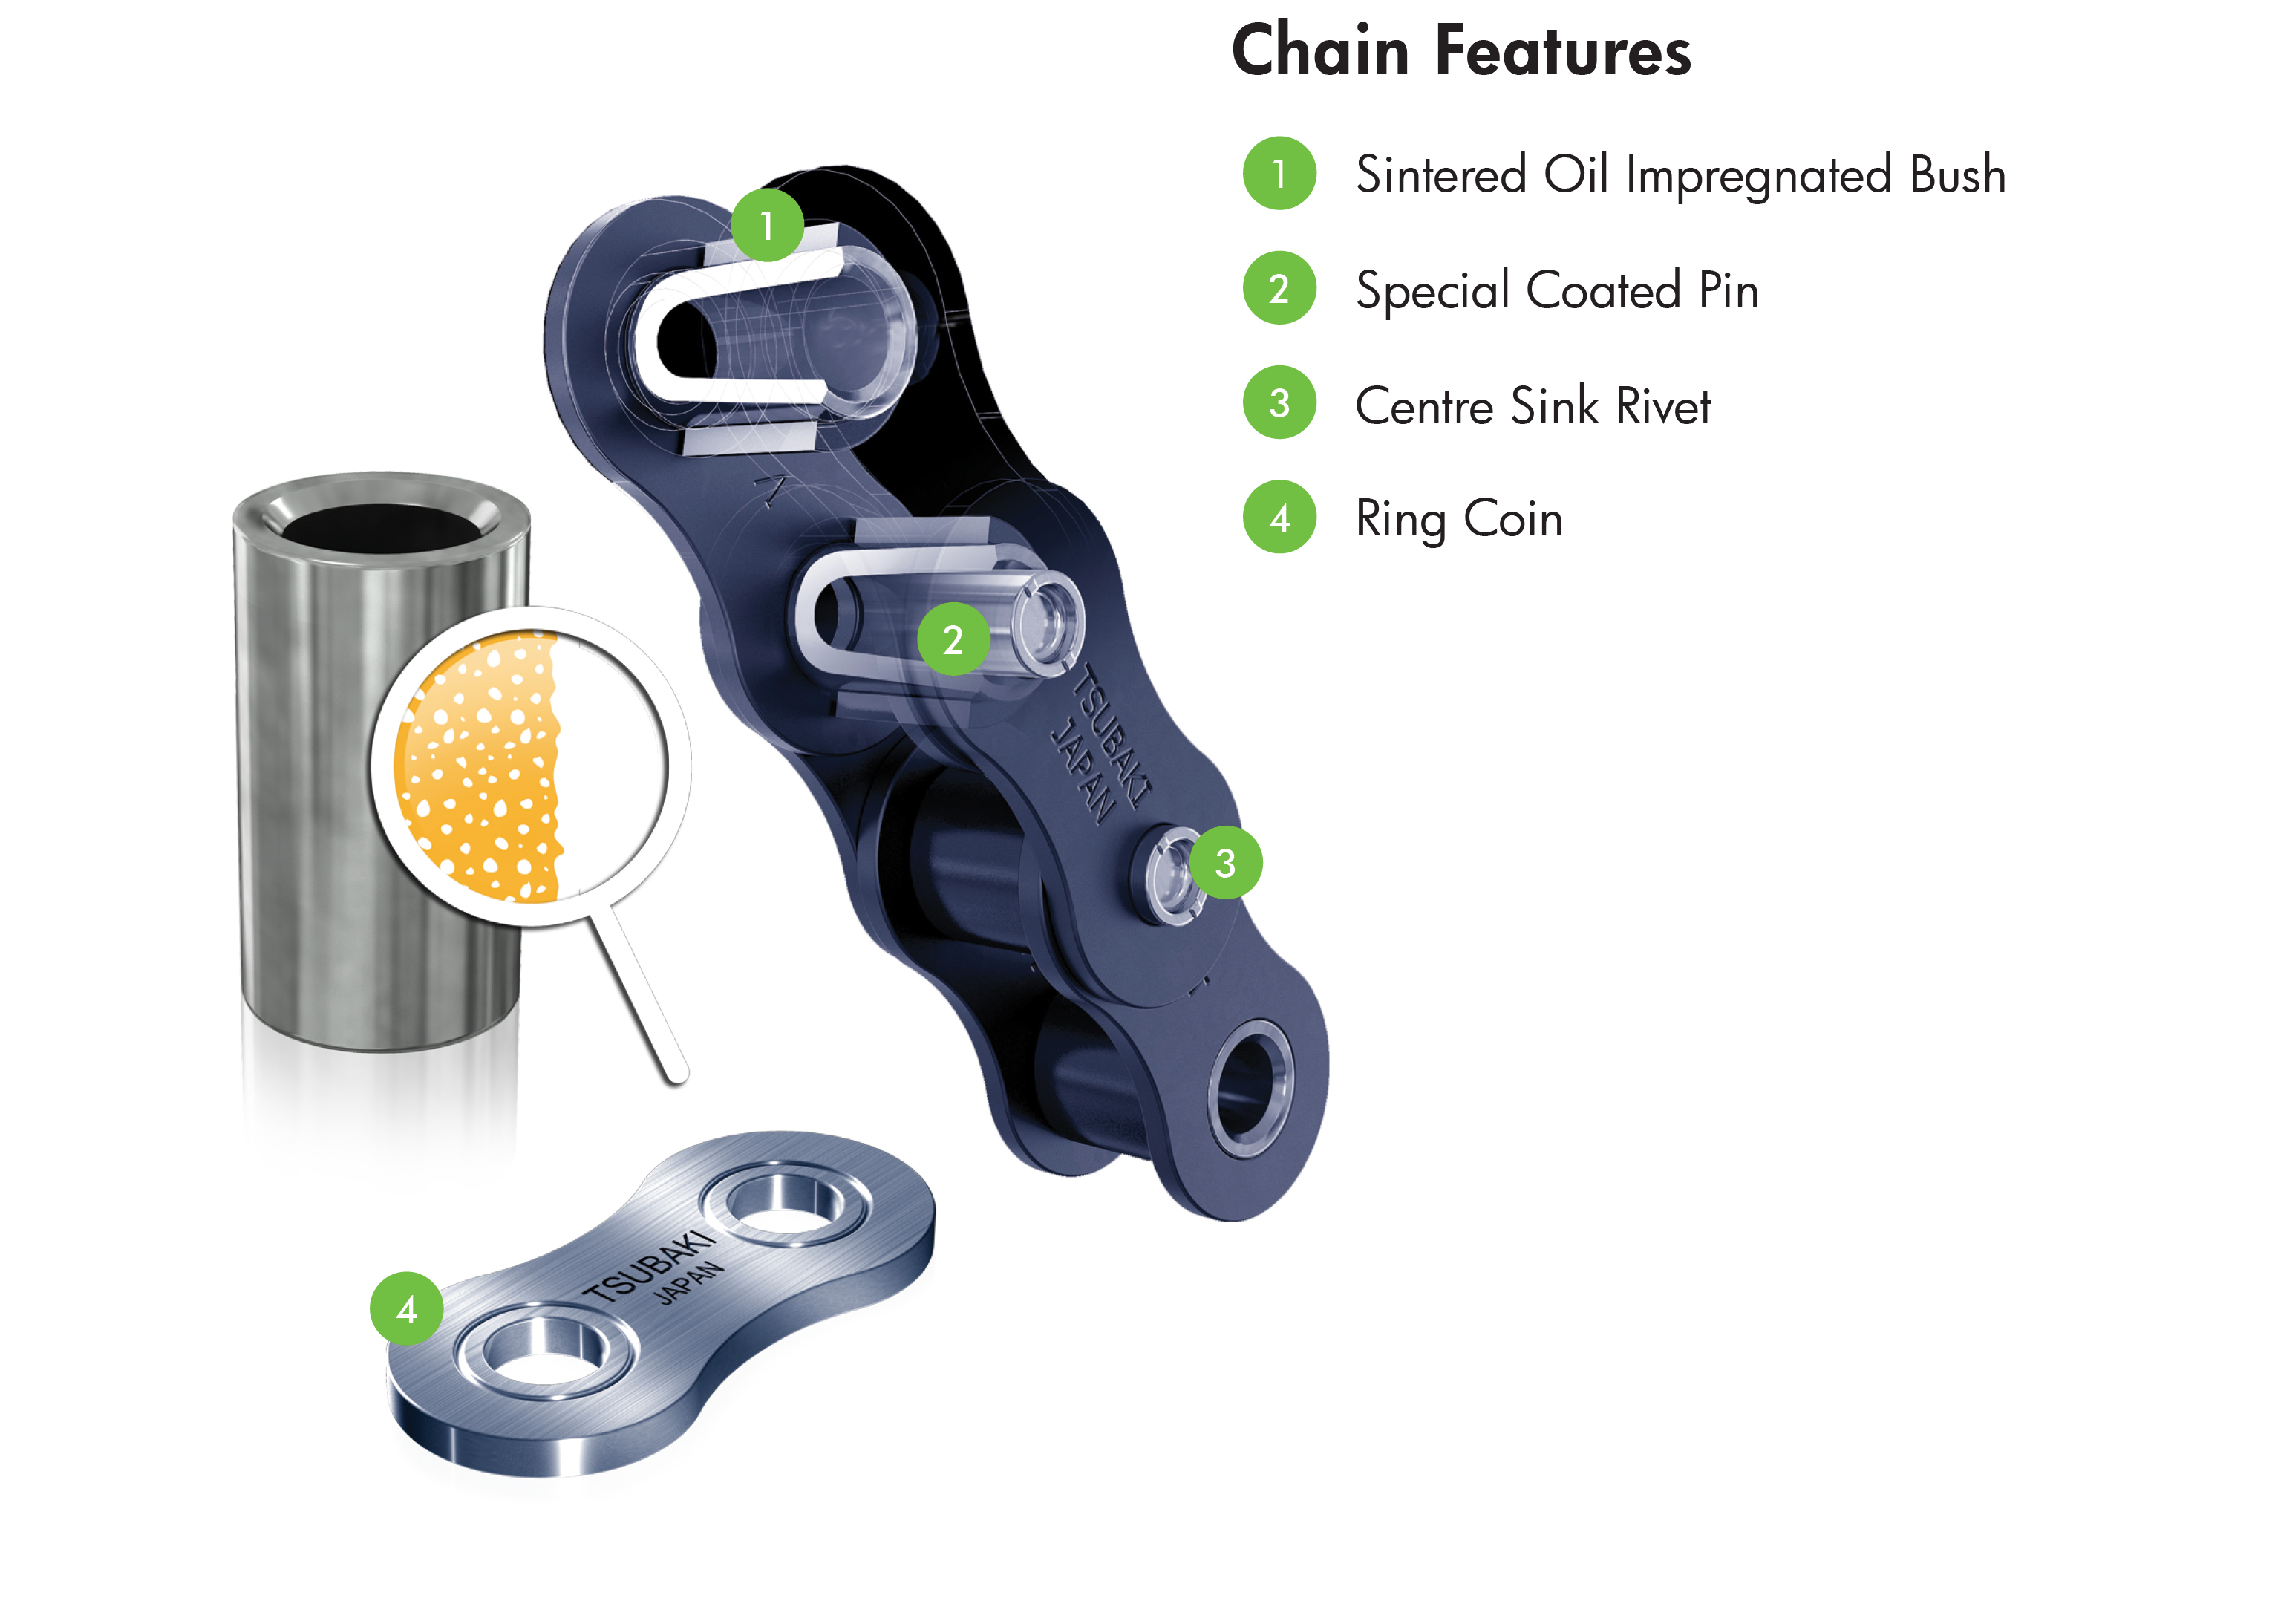 The lube-free technology of the Lambda Chain includes bushes that are sintered, meaning the material is formed into a solid mass through heating without liquification.